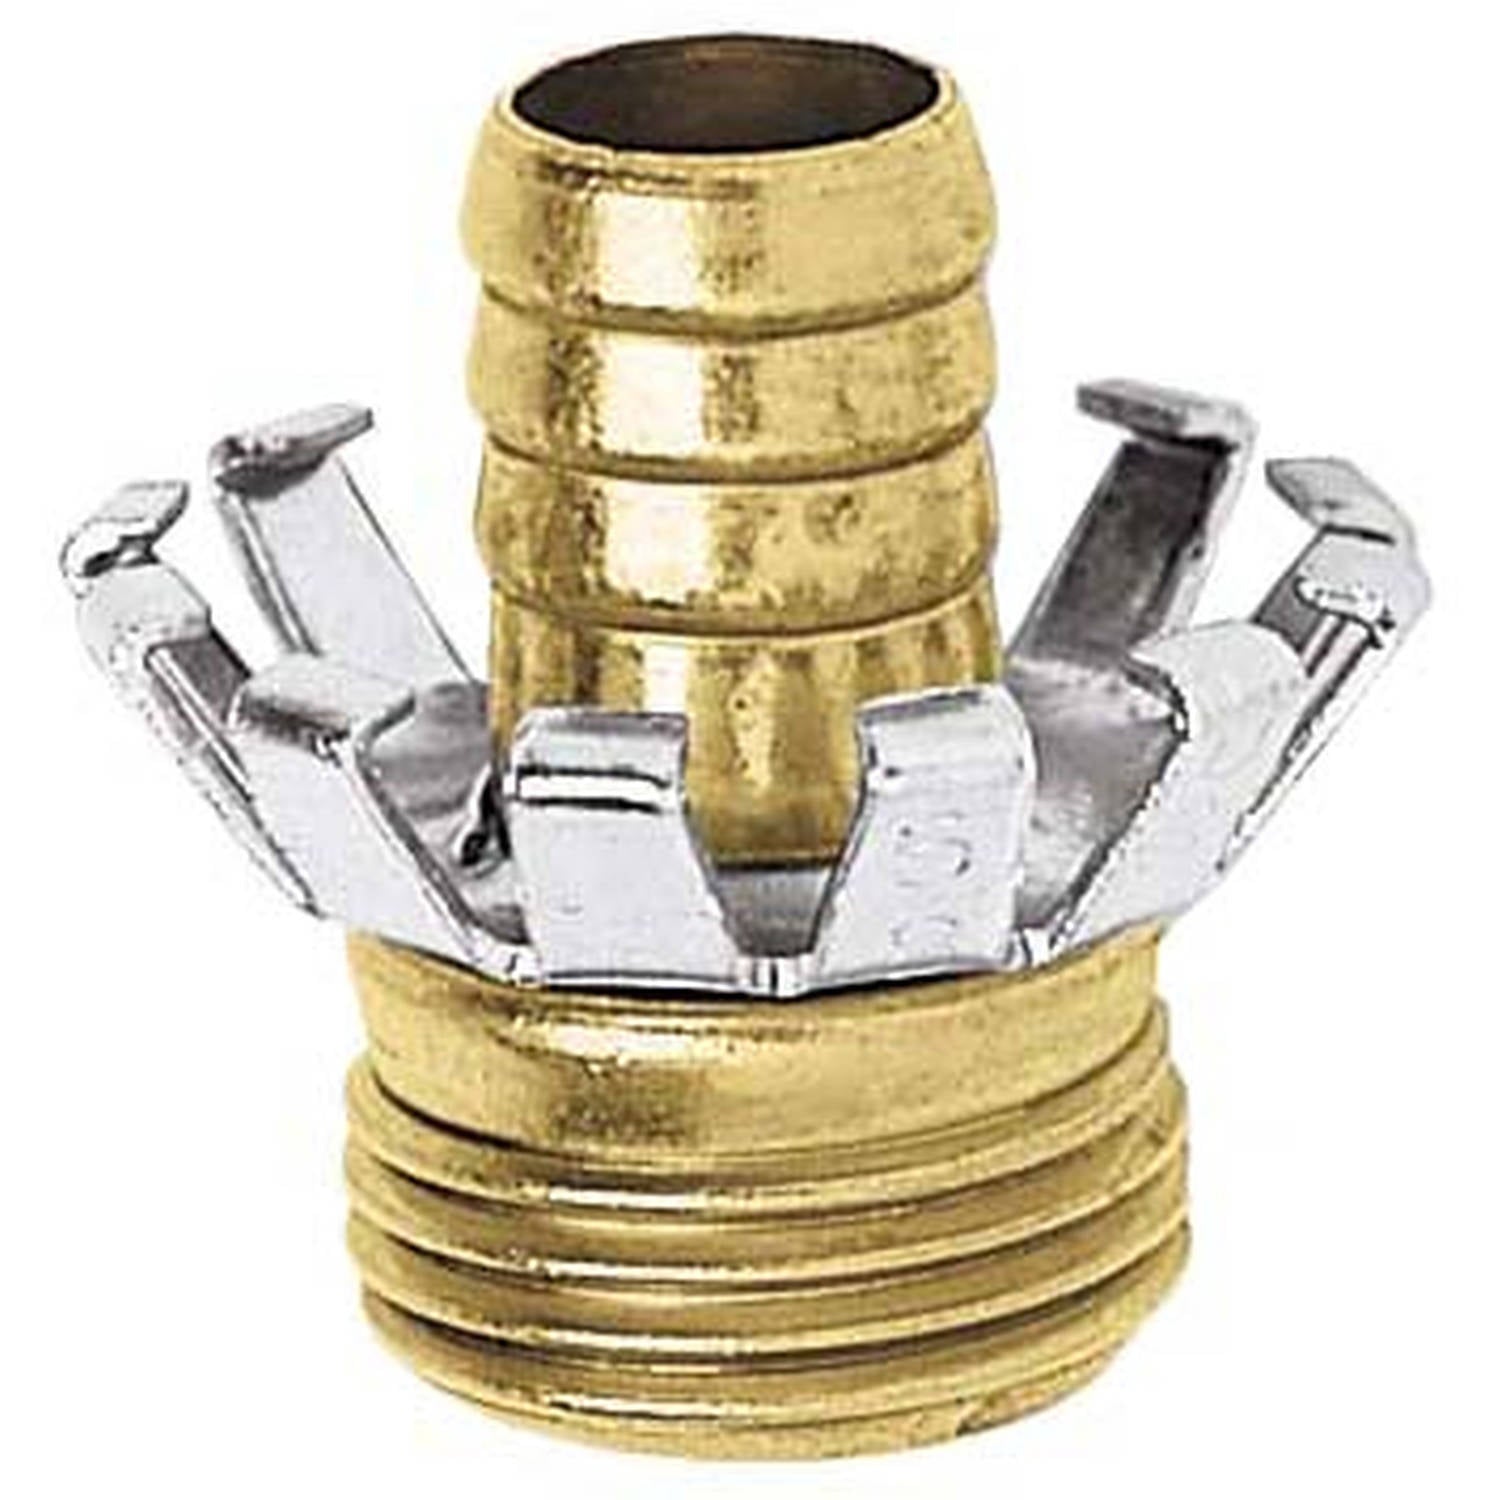 Gilmour C34M 3/4" Hose Repair Hot Water Brass Hose Replacement Fitting